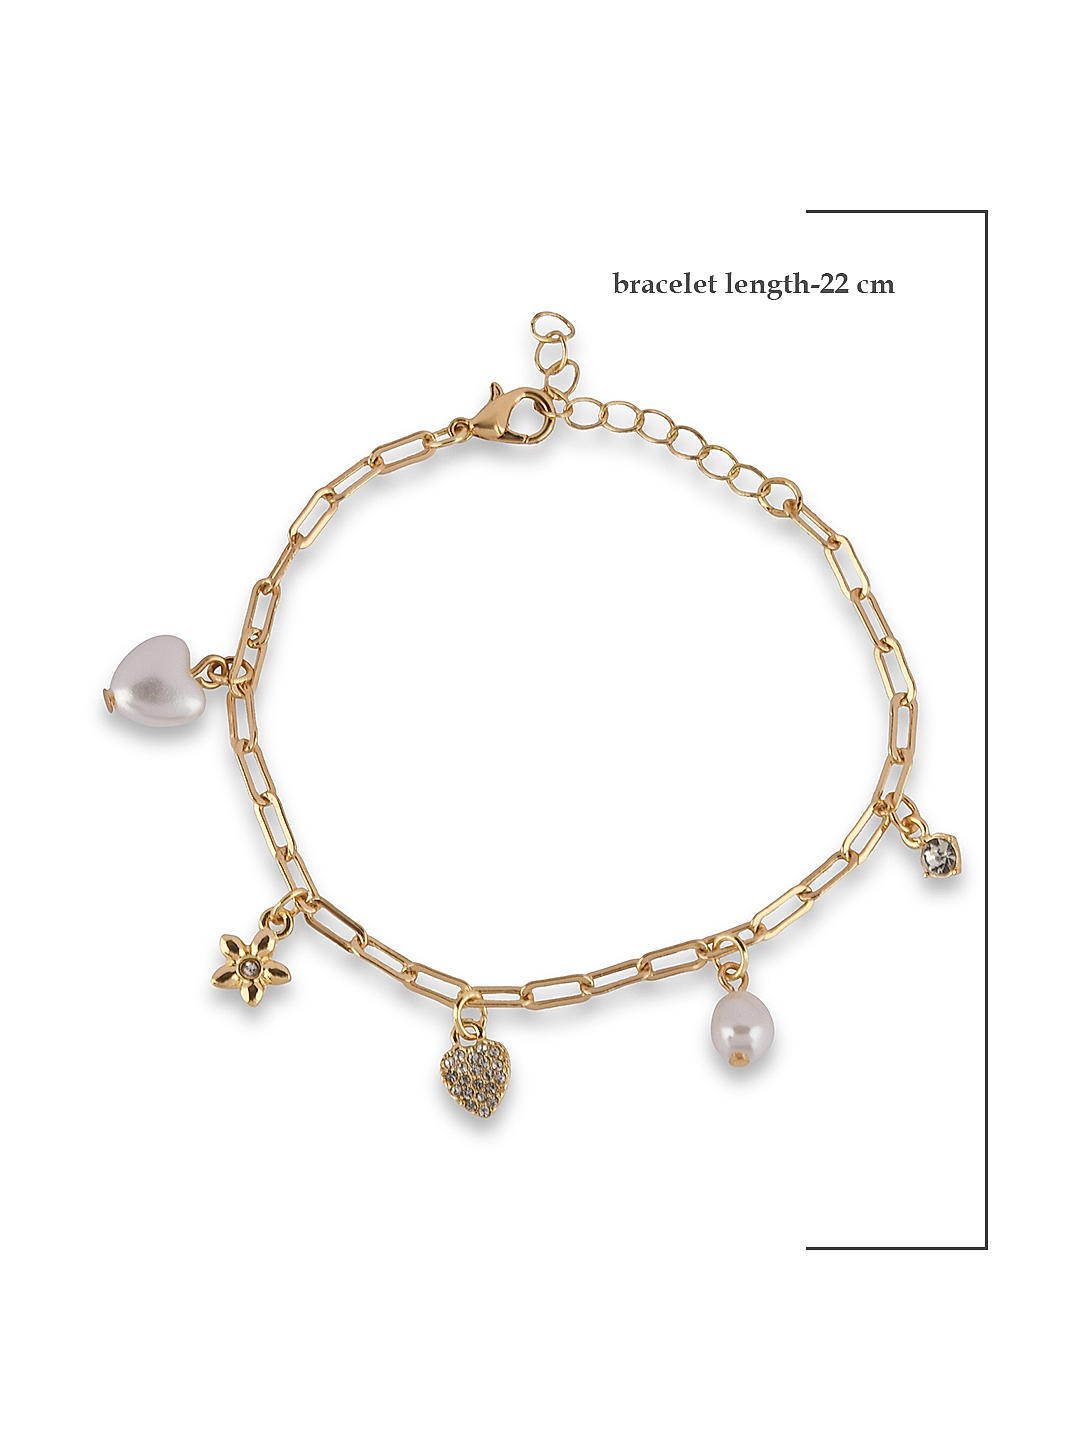 Yellow Gold Charm Bracelet with Box Clasp